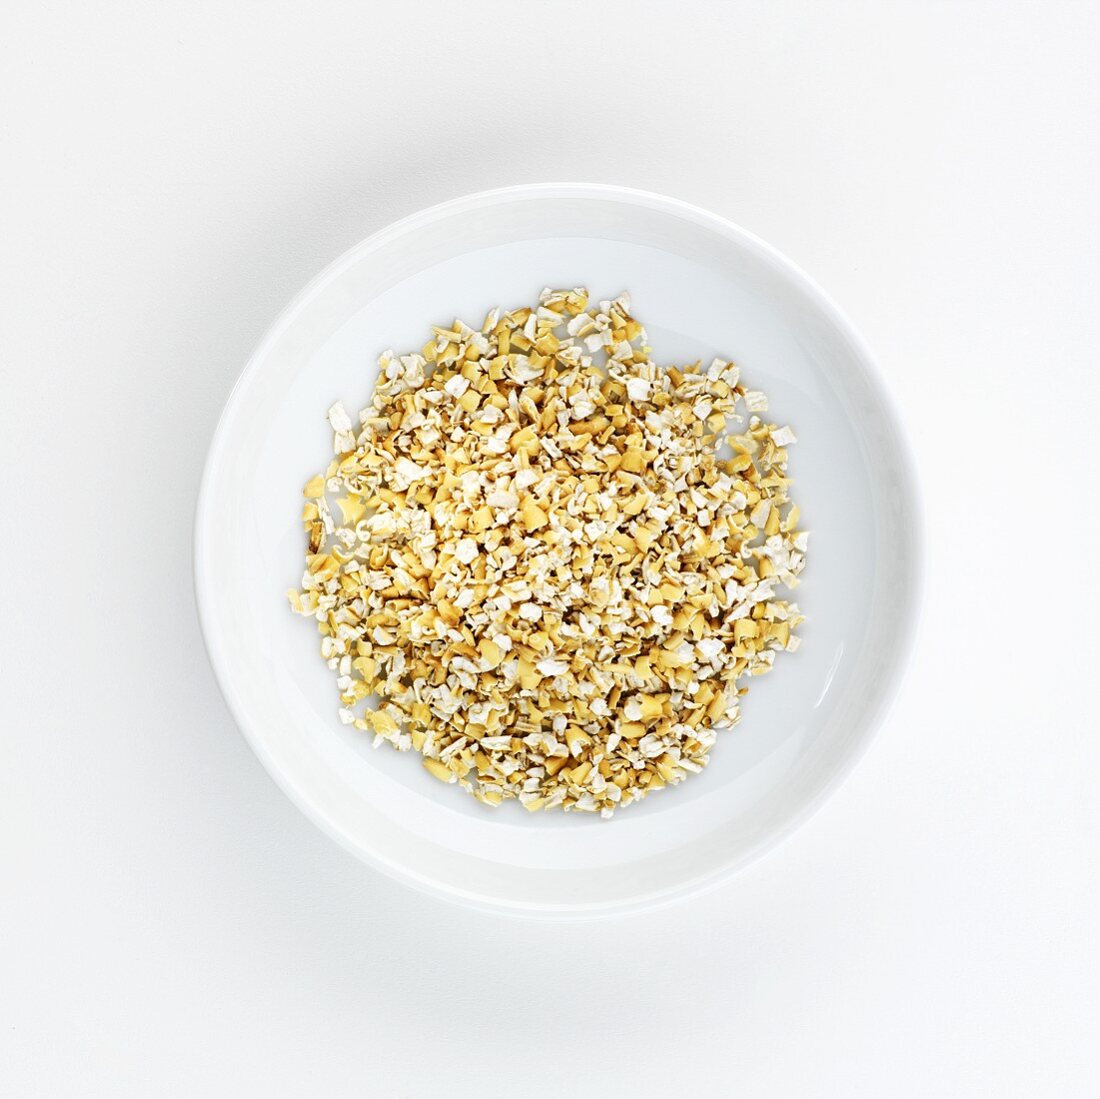 Wheat bran on a plate, seen from above